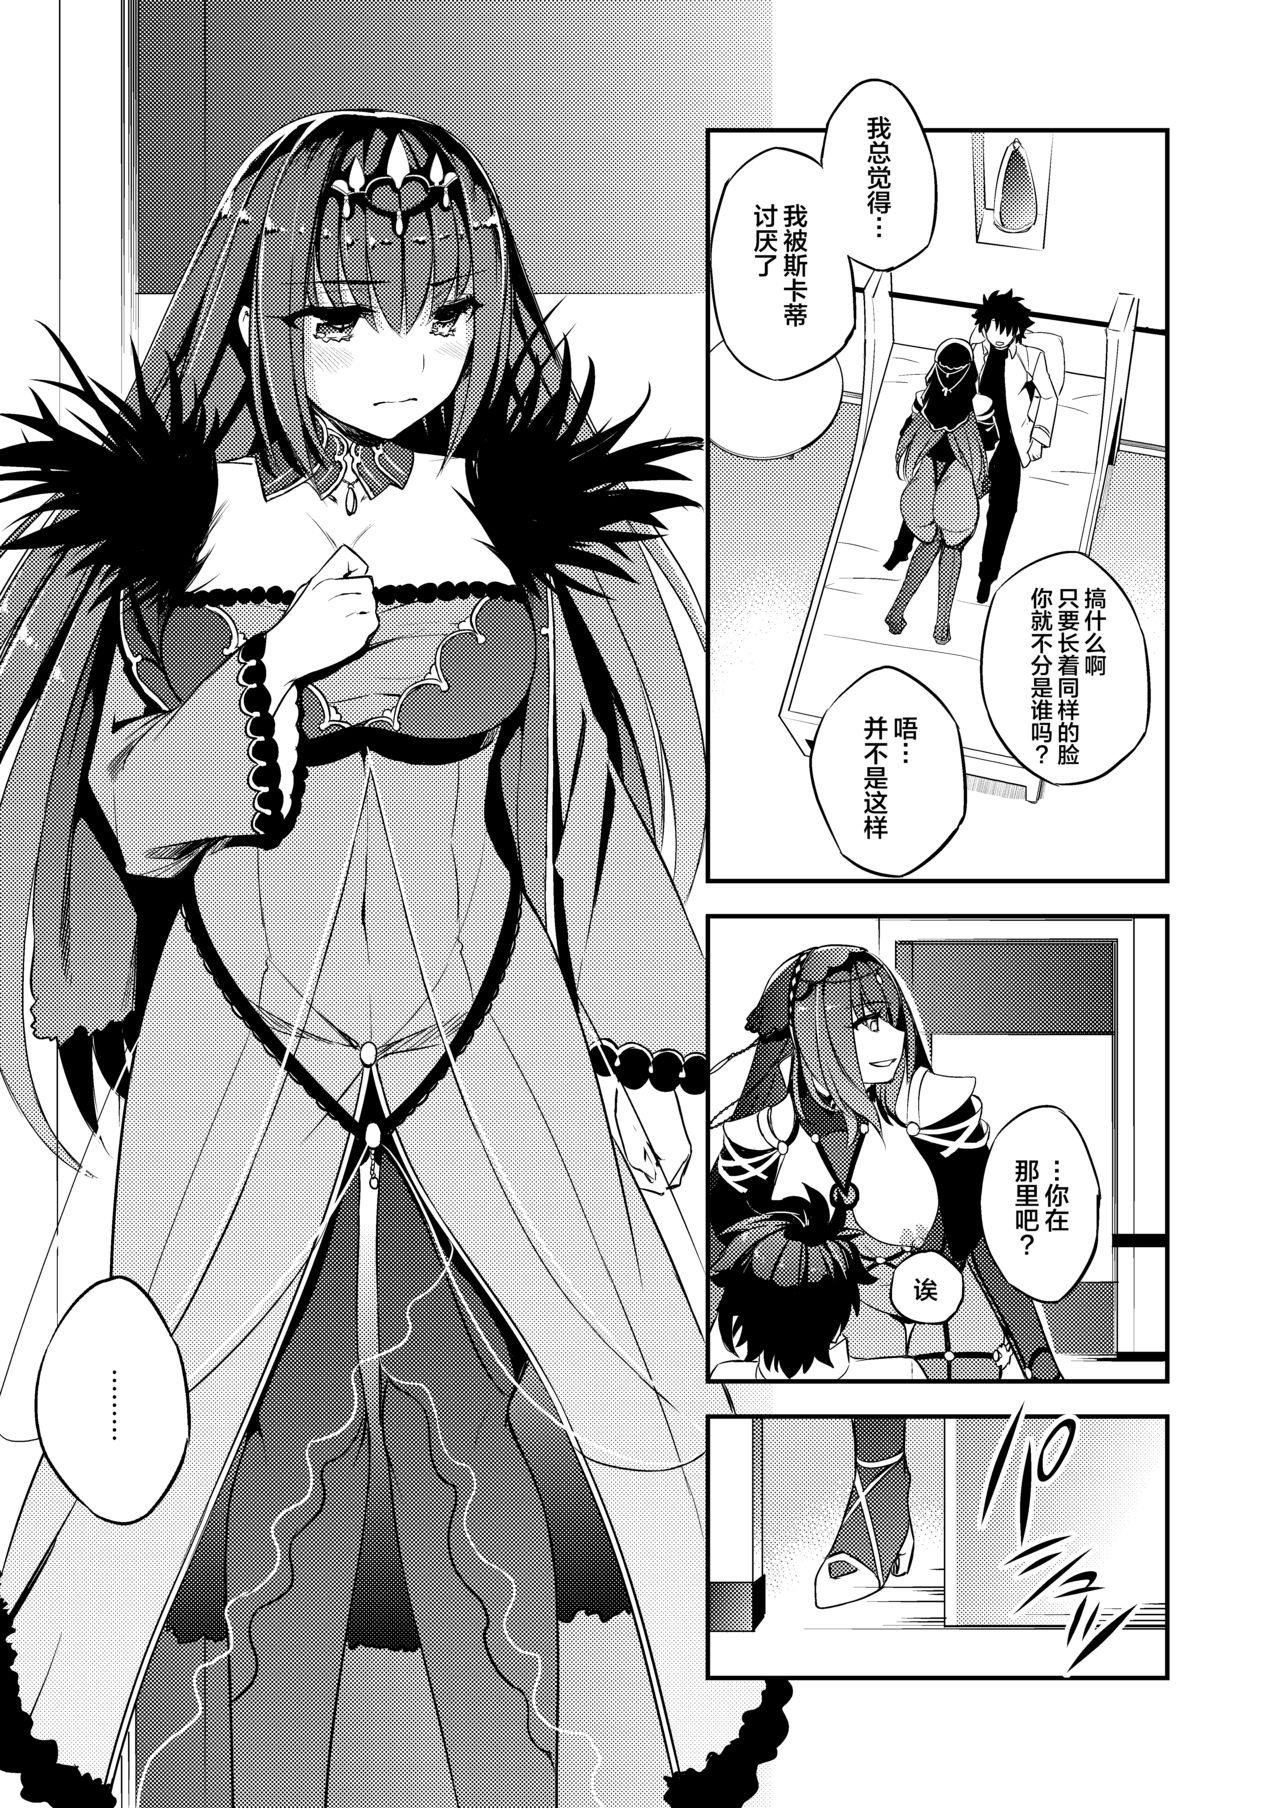 Pija C9-39 W Scathach to - Fate grand order Gangbang - Page 5